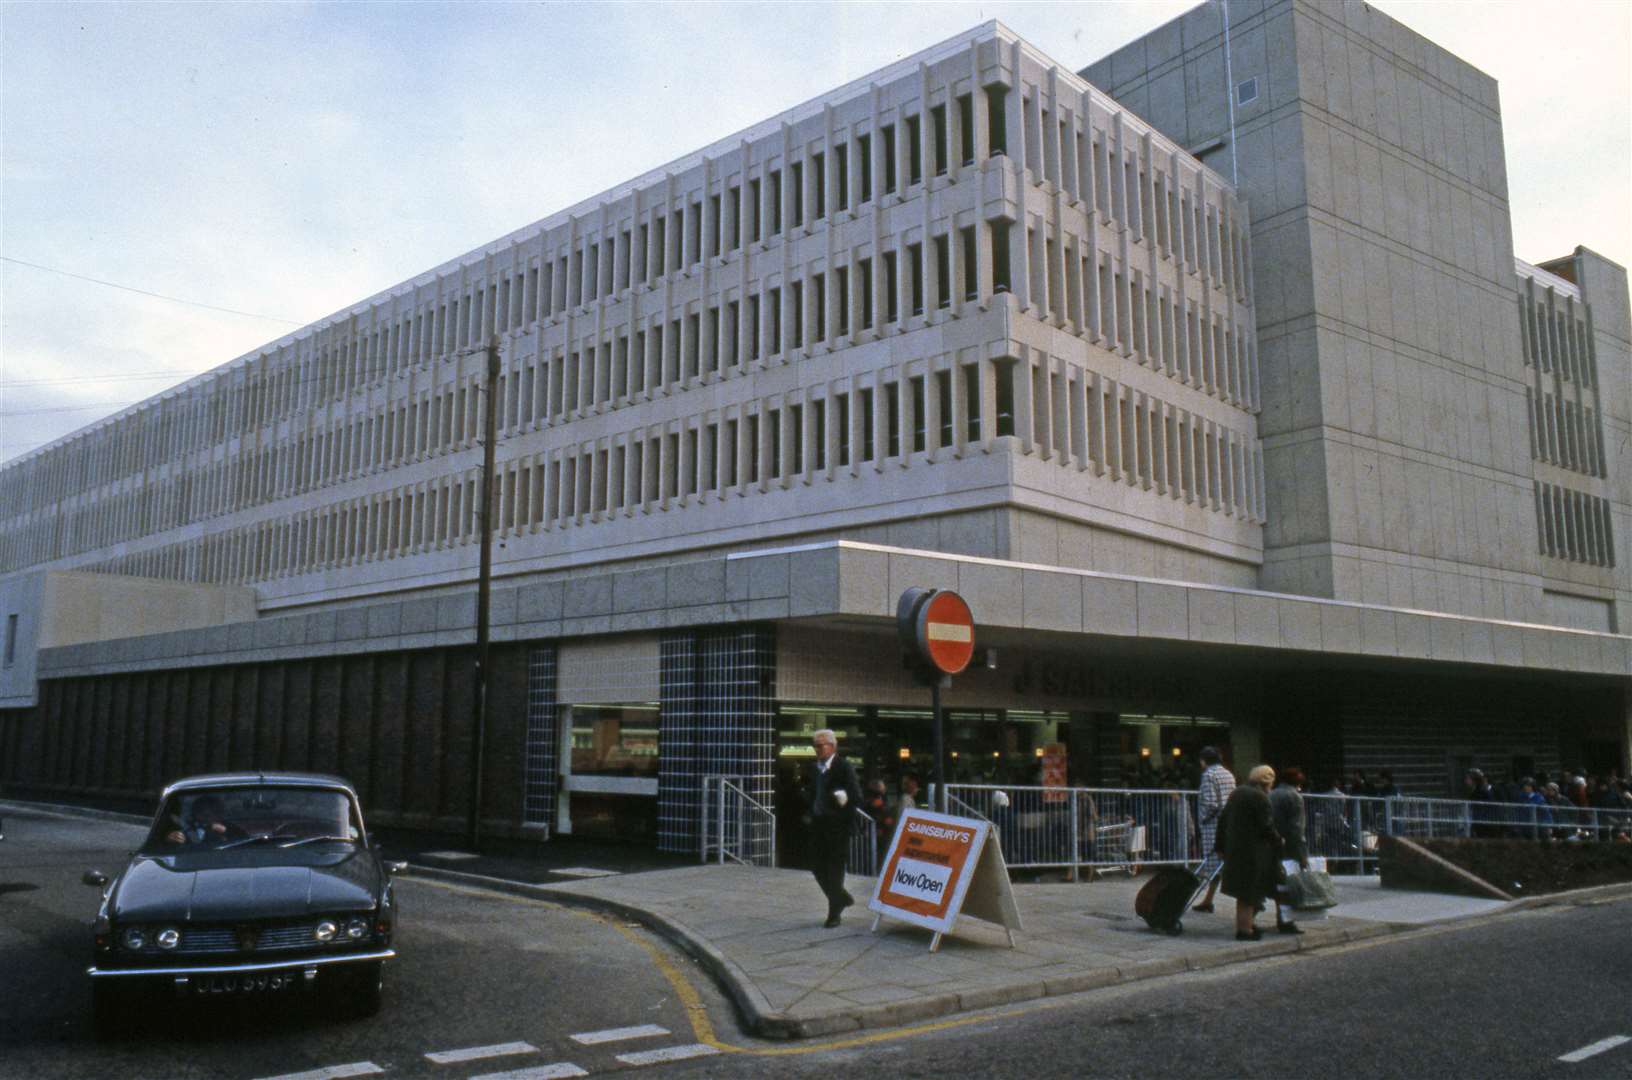 Back in 1978, this is how the Park Street store in Ashford looked. Today the site, part of the Park Mall complex, is occupied by Wilkos. Picture: The Sainsbury Archive, Museum of London Docklands